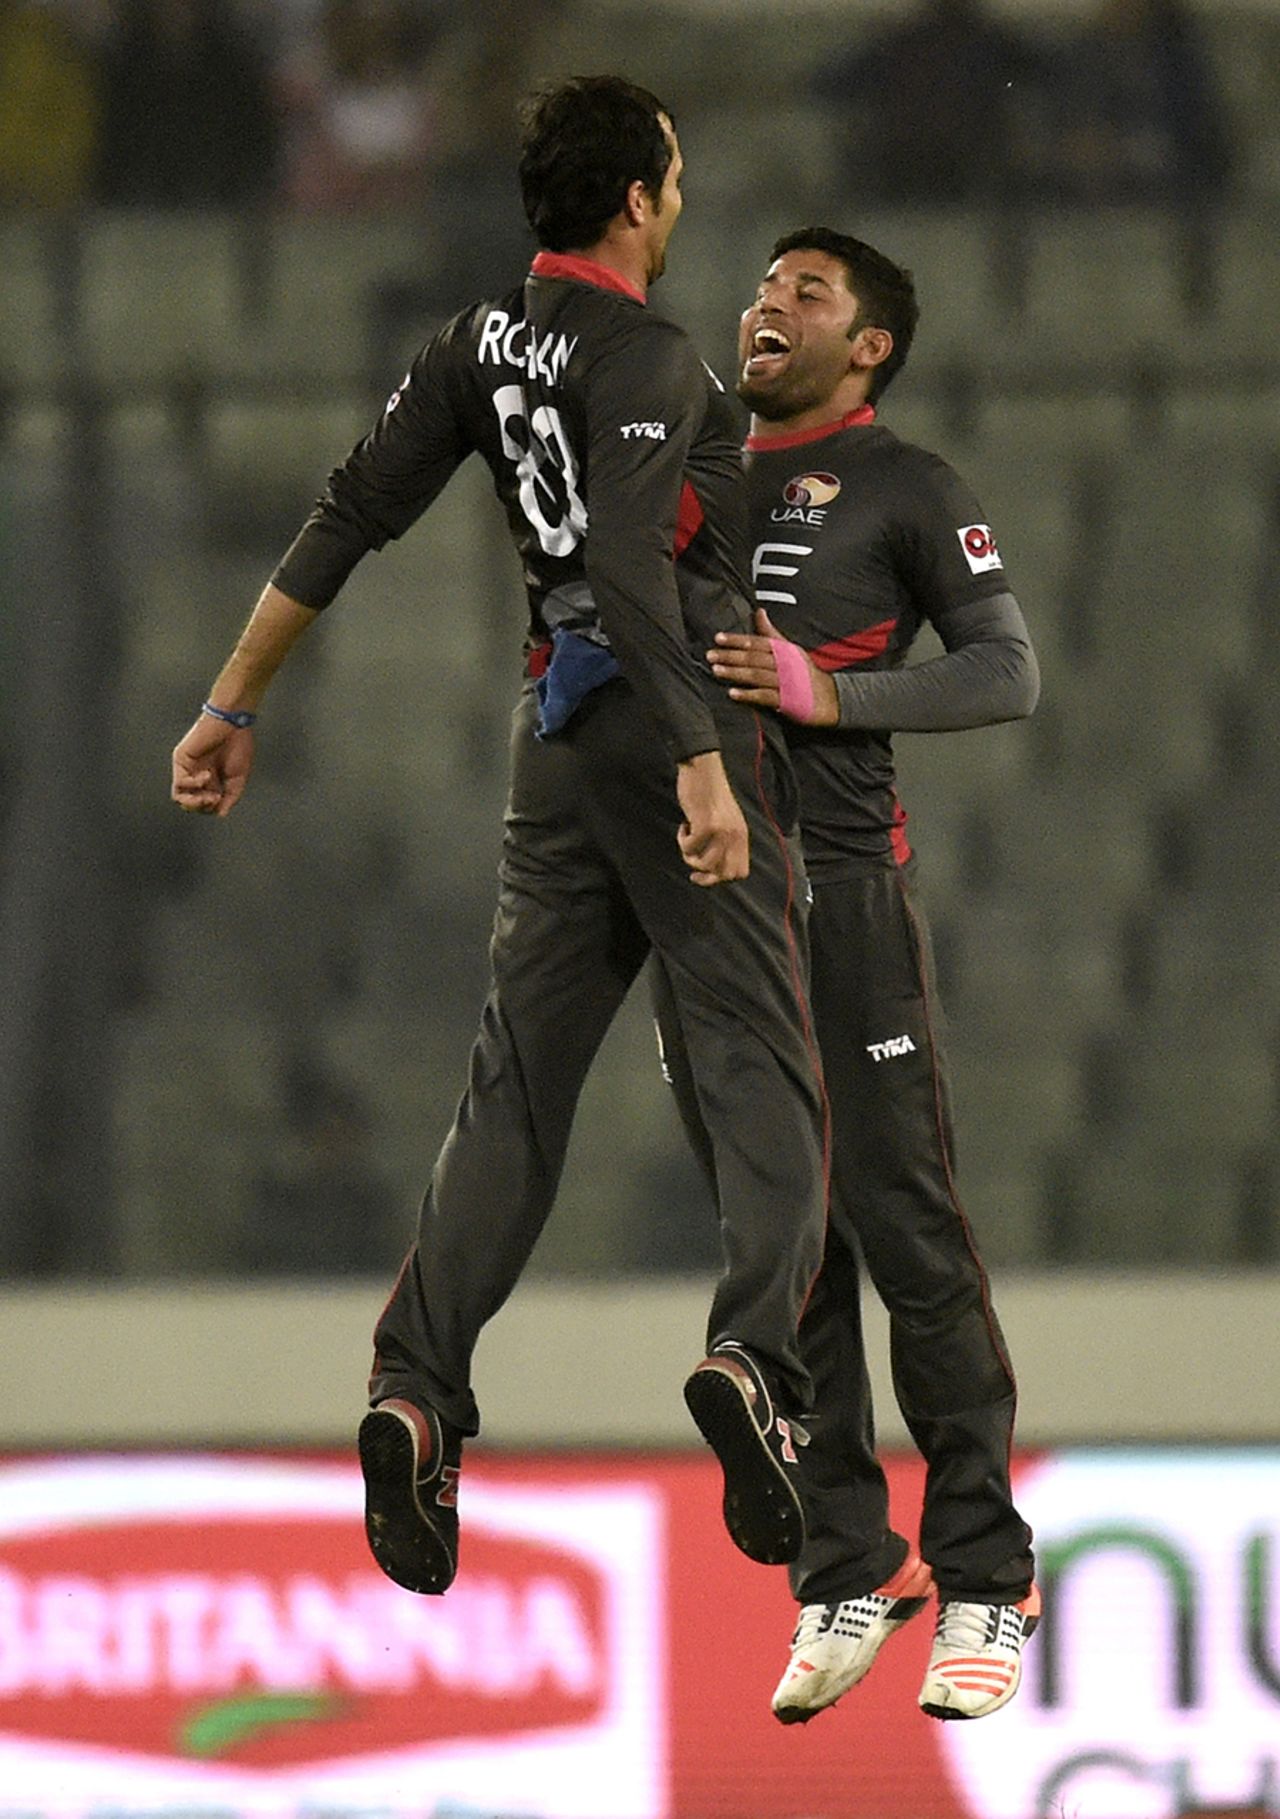 Rohan Mustafa and Mohammad Naveed bump chests to celebrate a wicket, Bangladesh v UAE, Asia Cup 2016, Mirpur, February 26, 2016